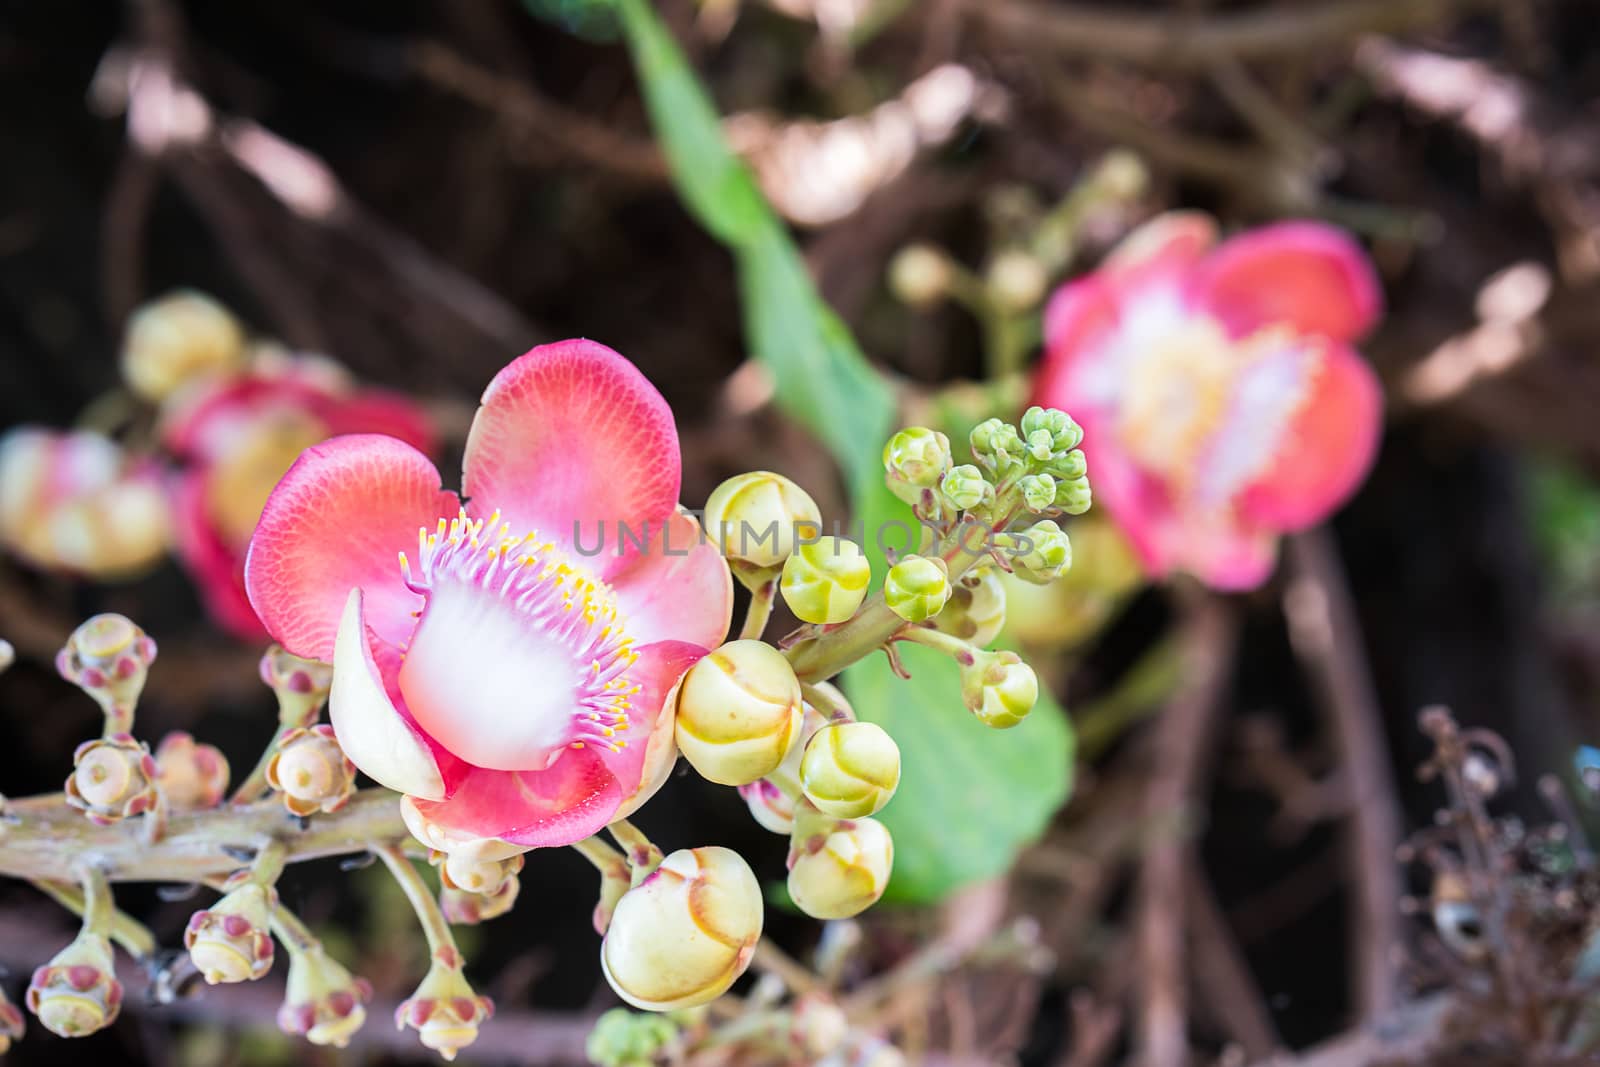 Cannonball flower (Couroupita guianensis) on the tree by stoonn